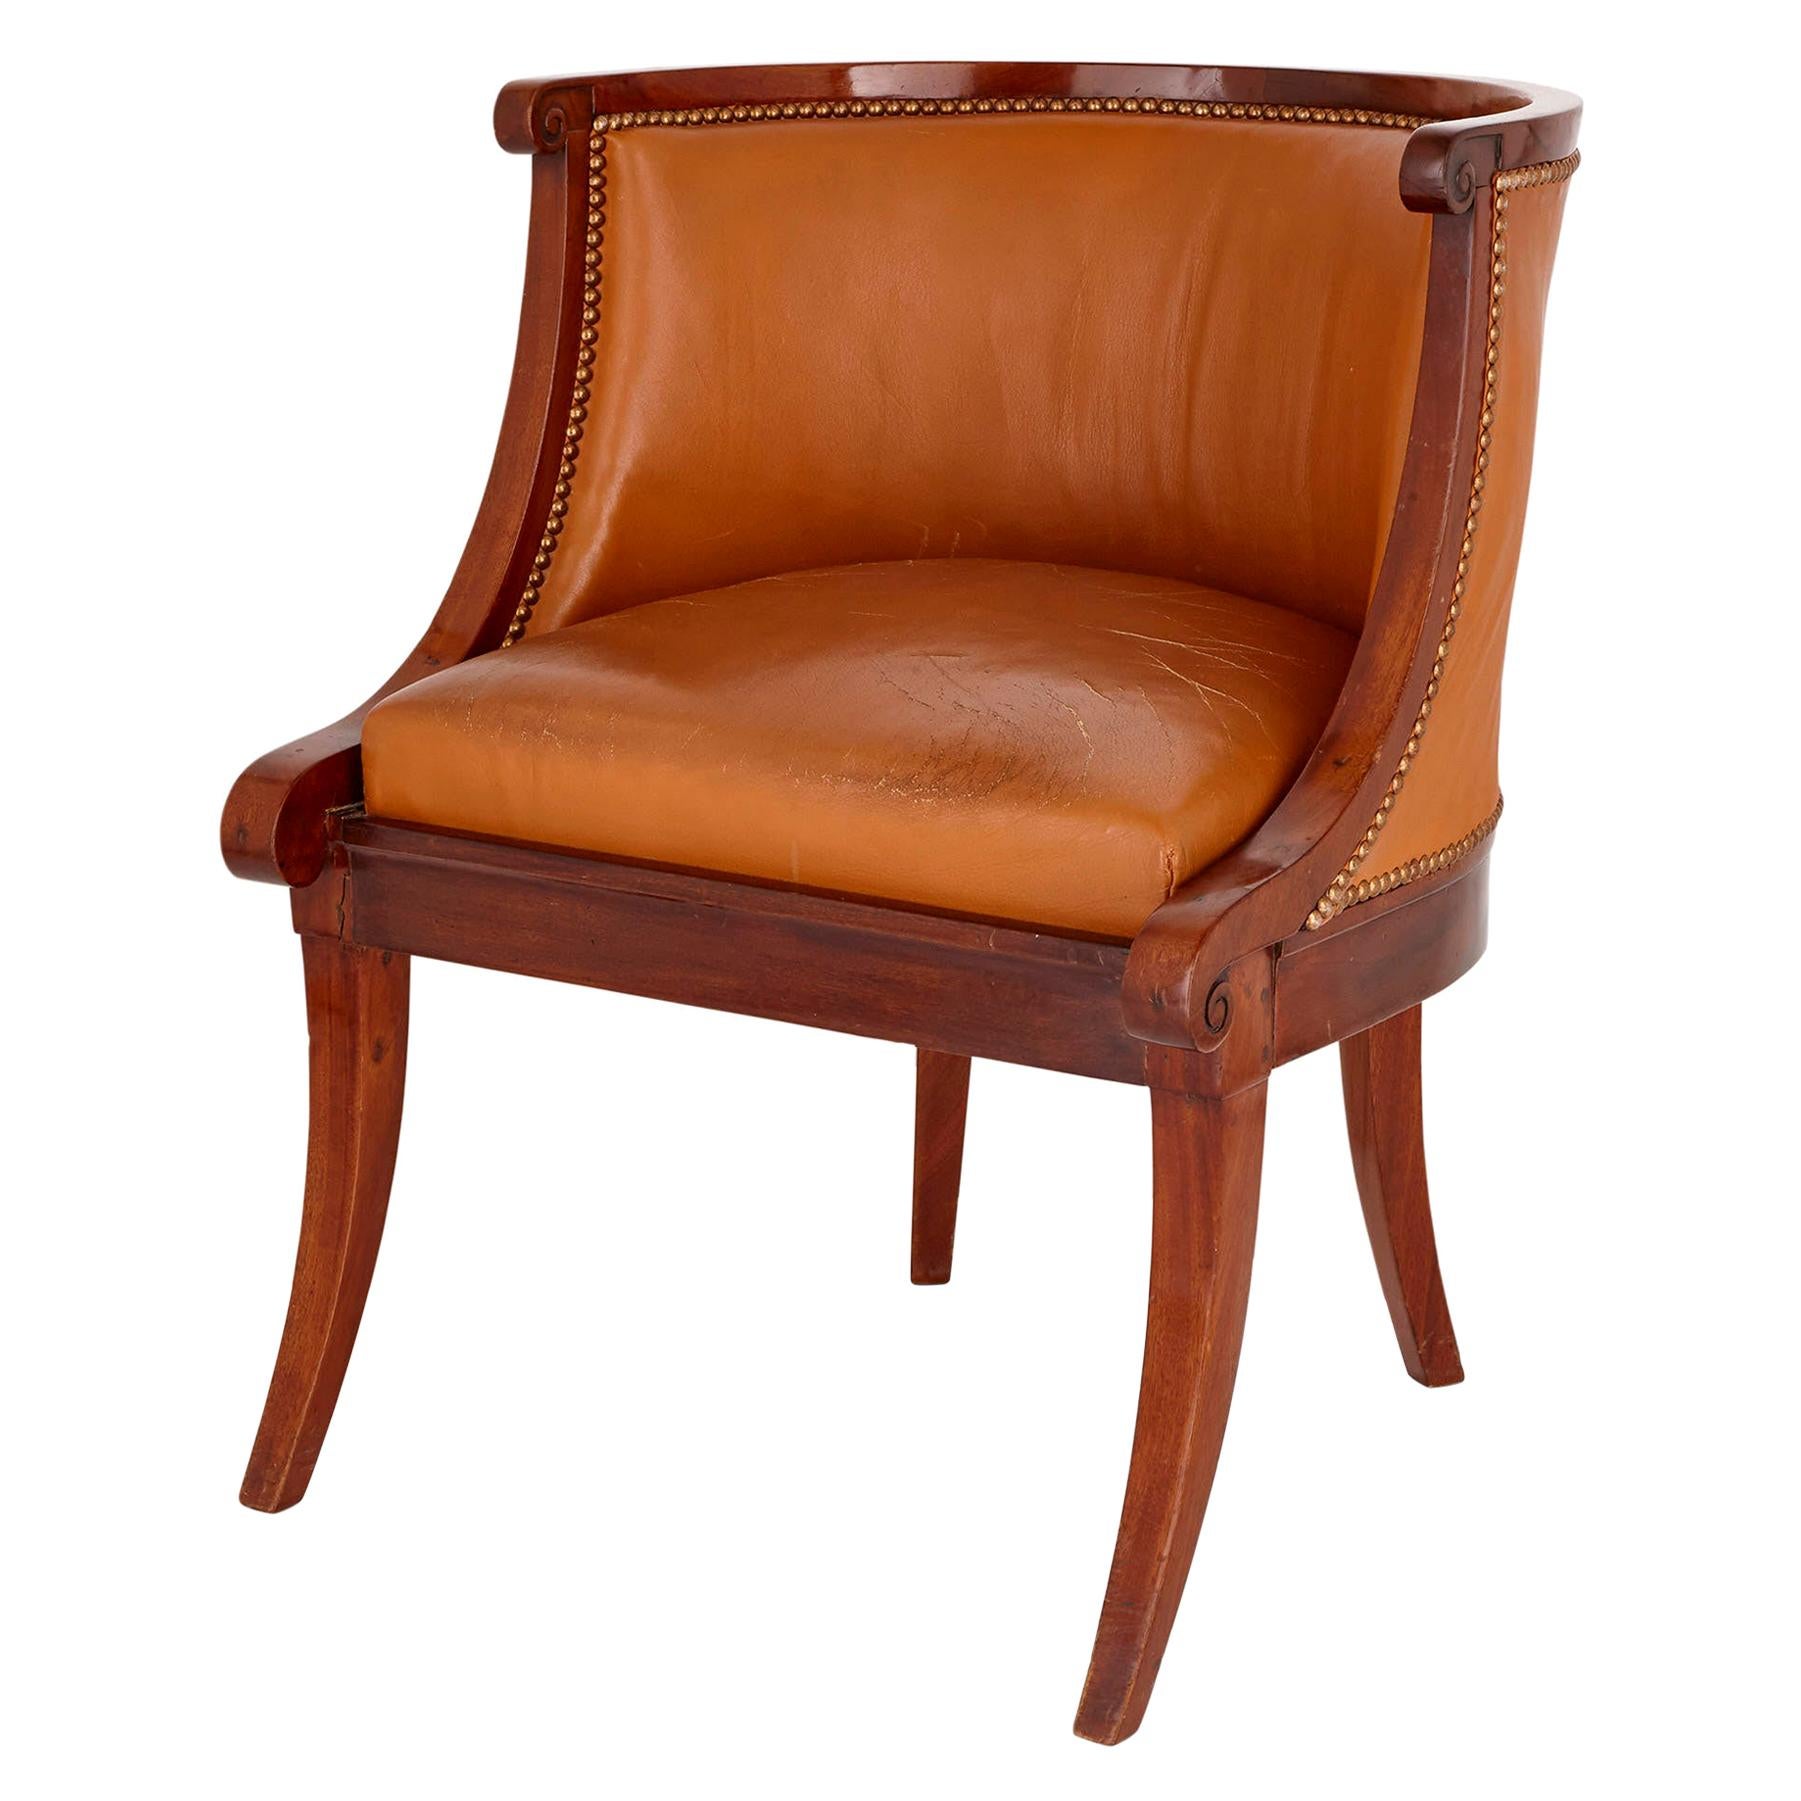 Neoclassical 18th Century French Leather Chair